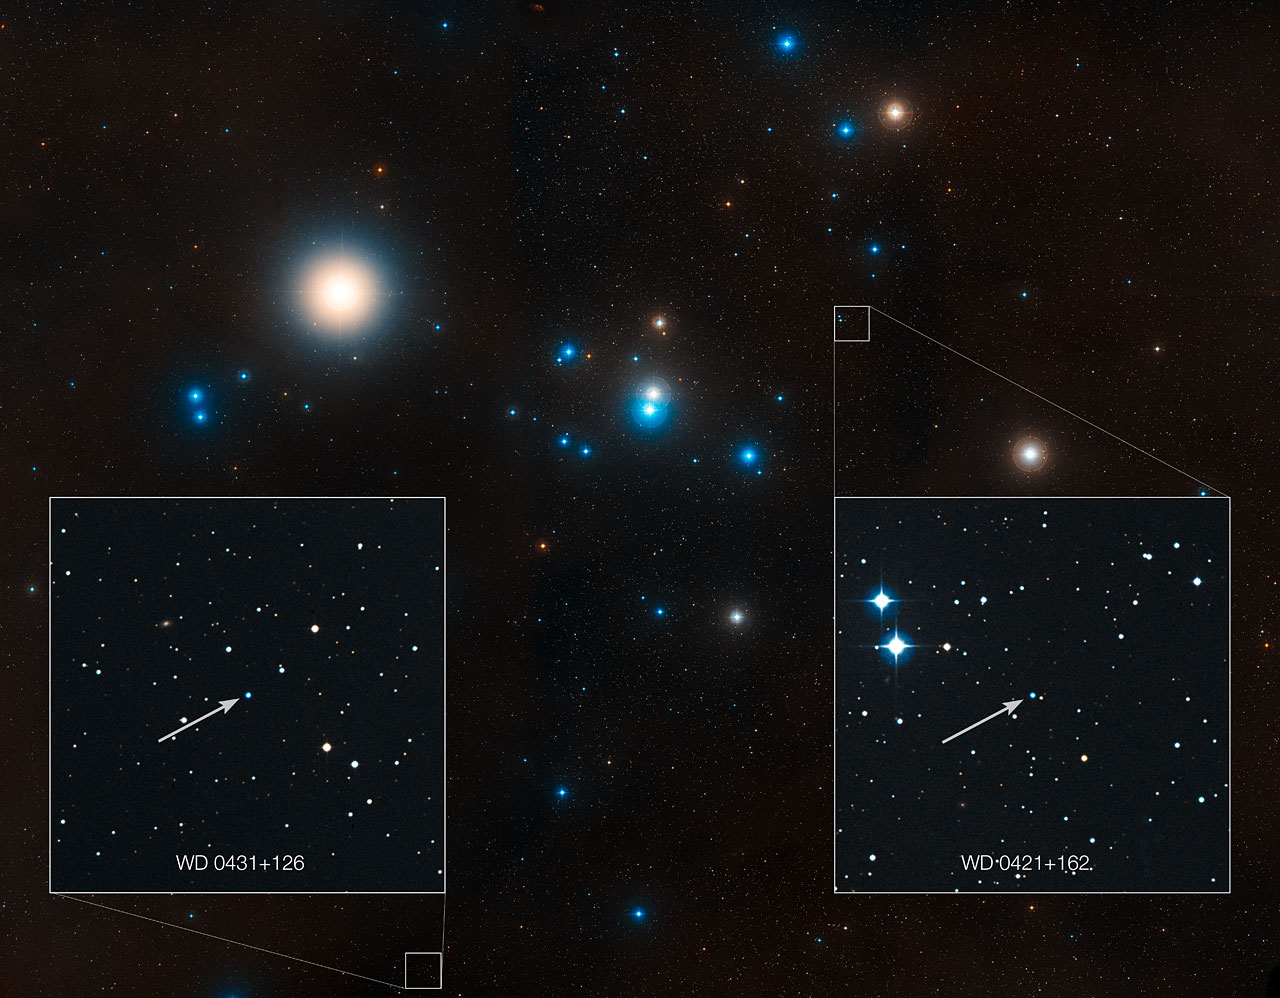 This image shows the region around the well-studied Hyades star cluster, the nearest open cluster to Earth.